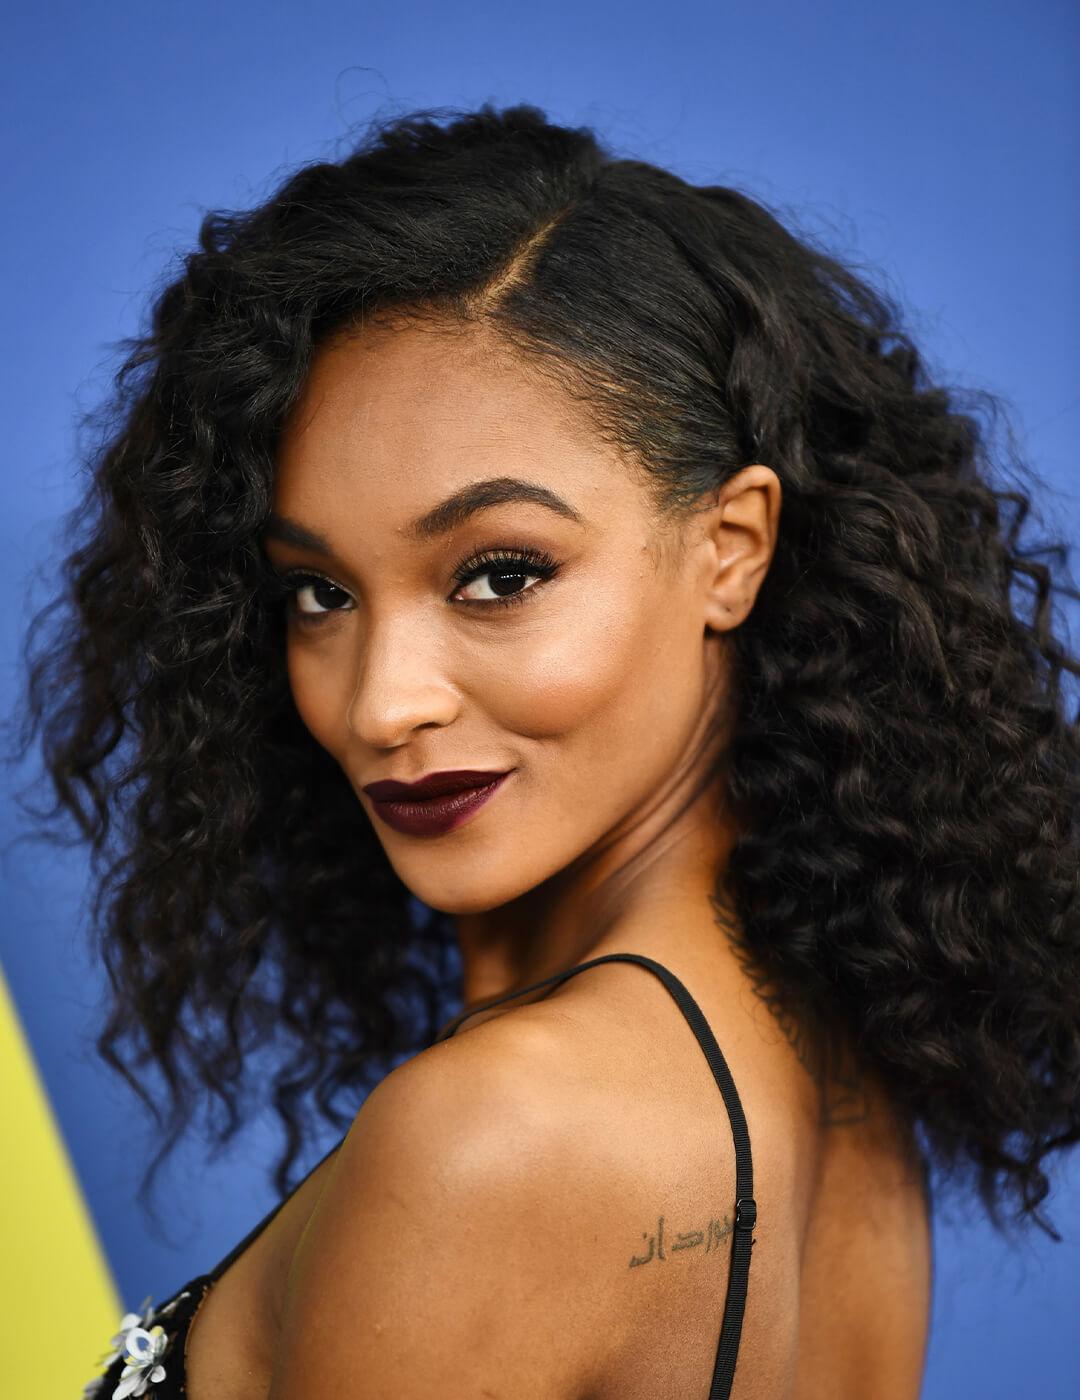 Jourdan Dunn in a black spaghetti strap dress rocking a parted, curly hairstyle while smirking